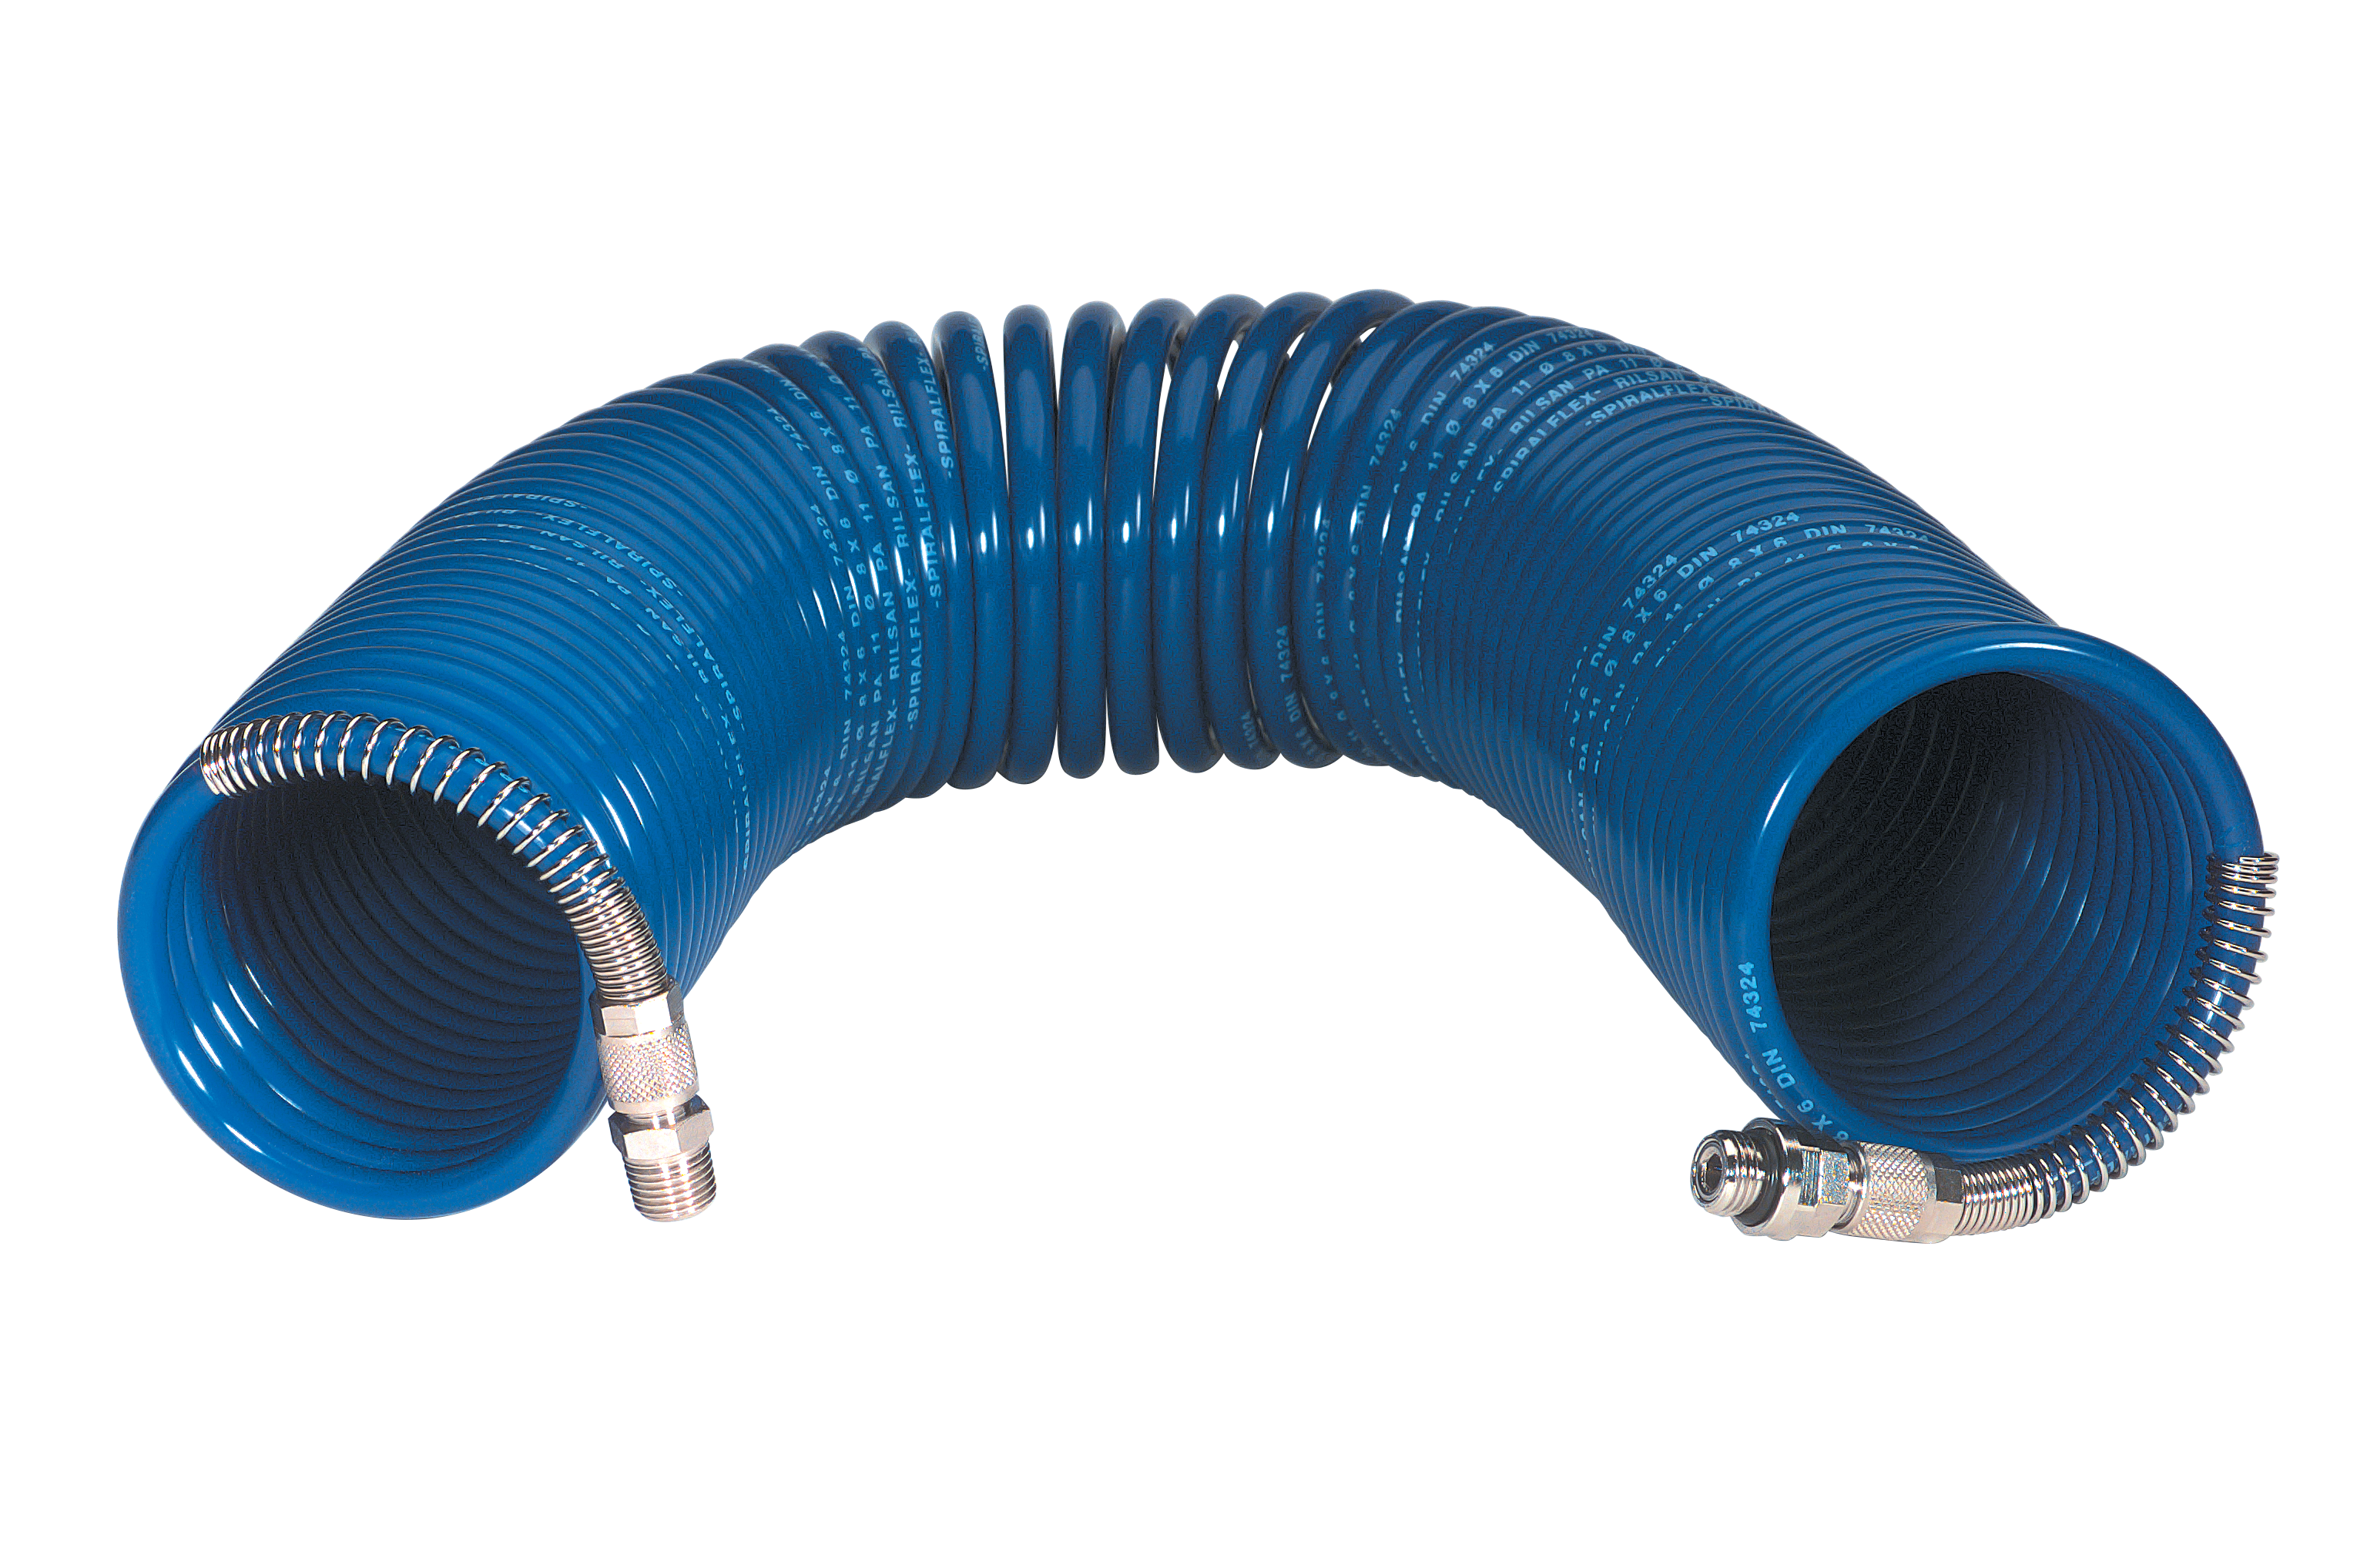 Polyamide spiral hoses equipped with 2 male threaded fi ttings